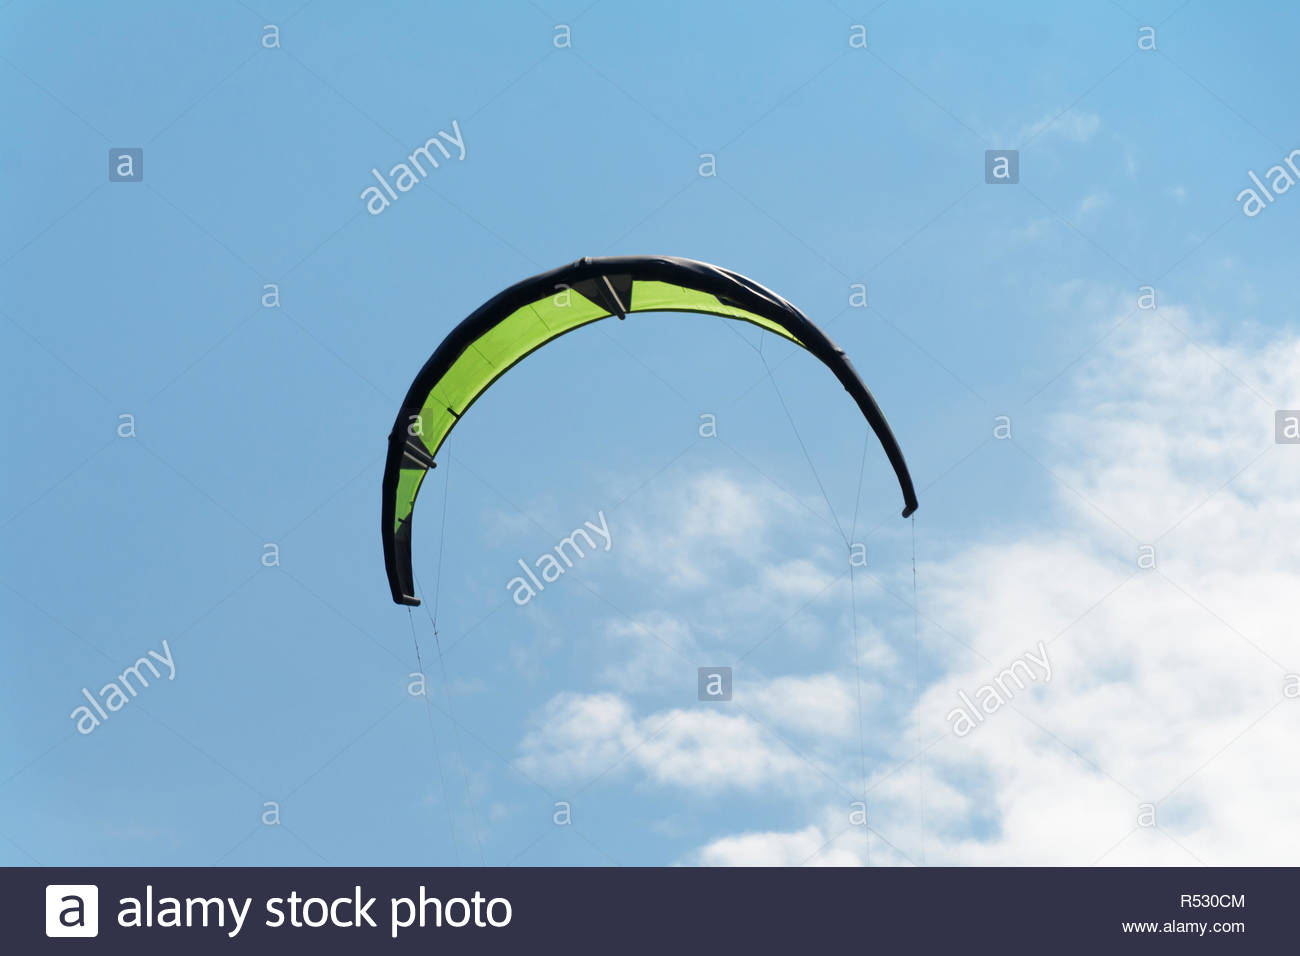 Kiteboarding Kite Close Up Blue Sky With Clouds In Background